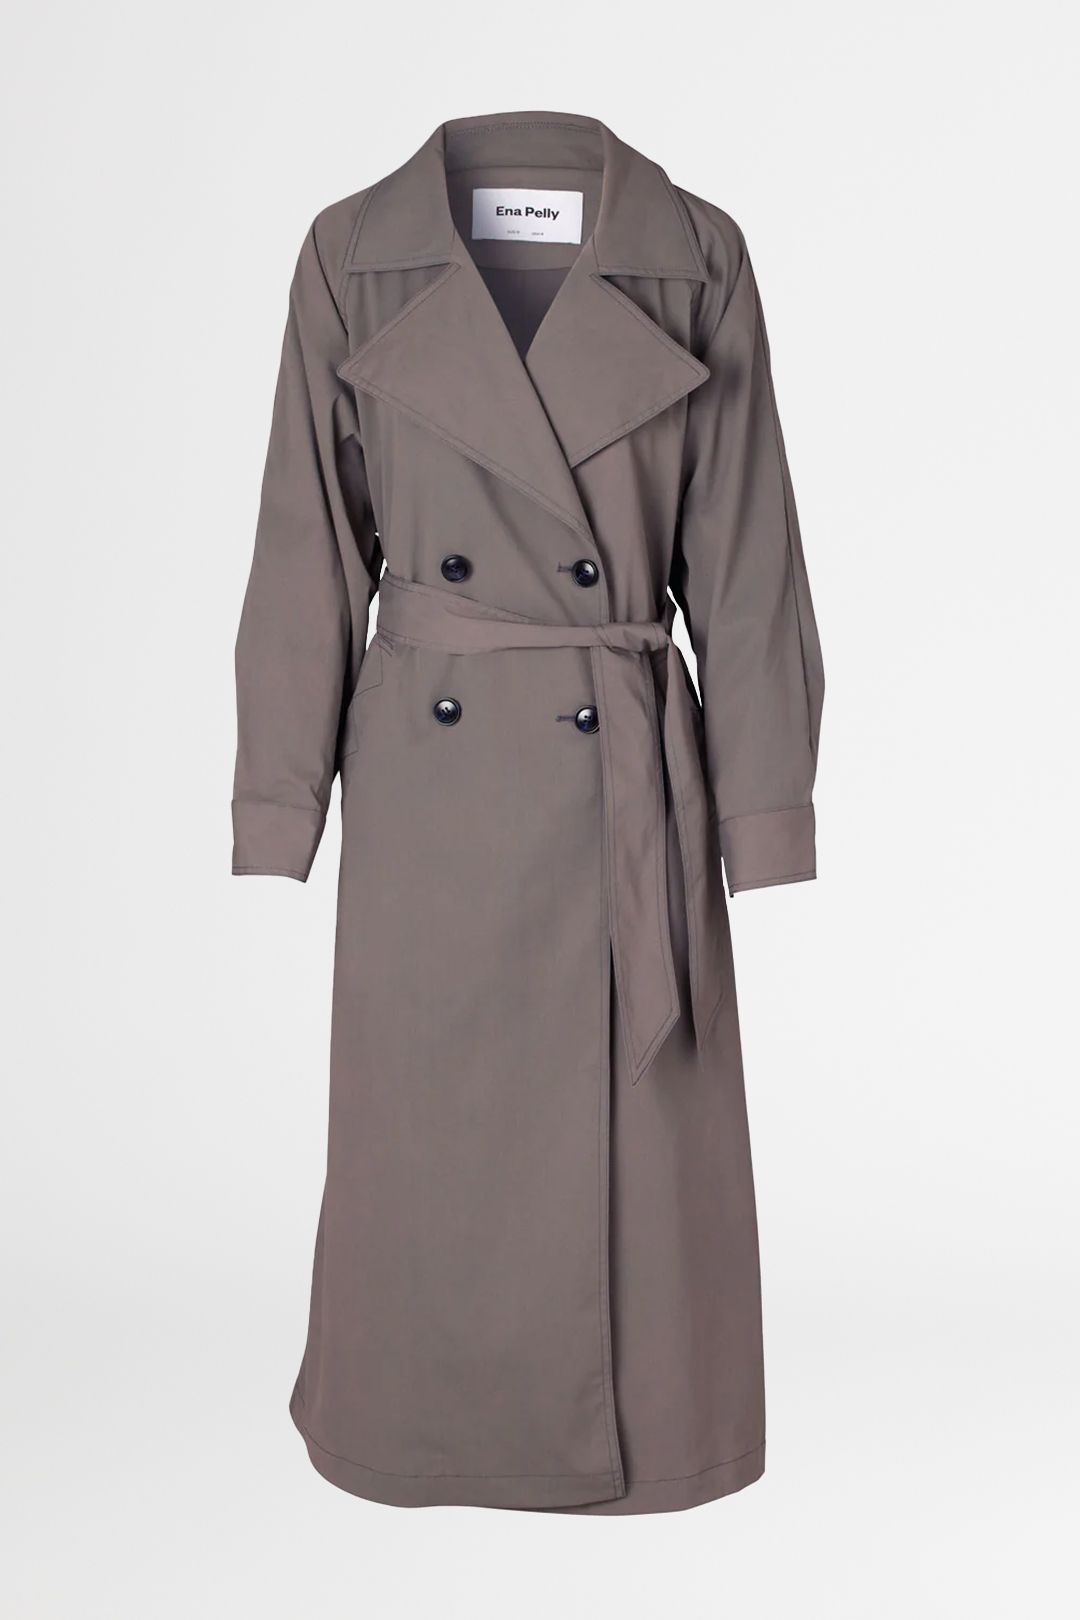 Ena Pelly Mila Twill Trench Charcoal